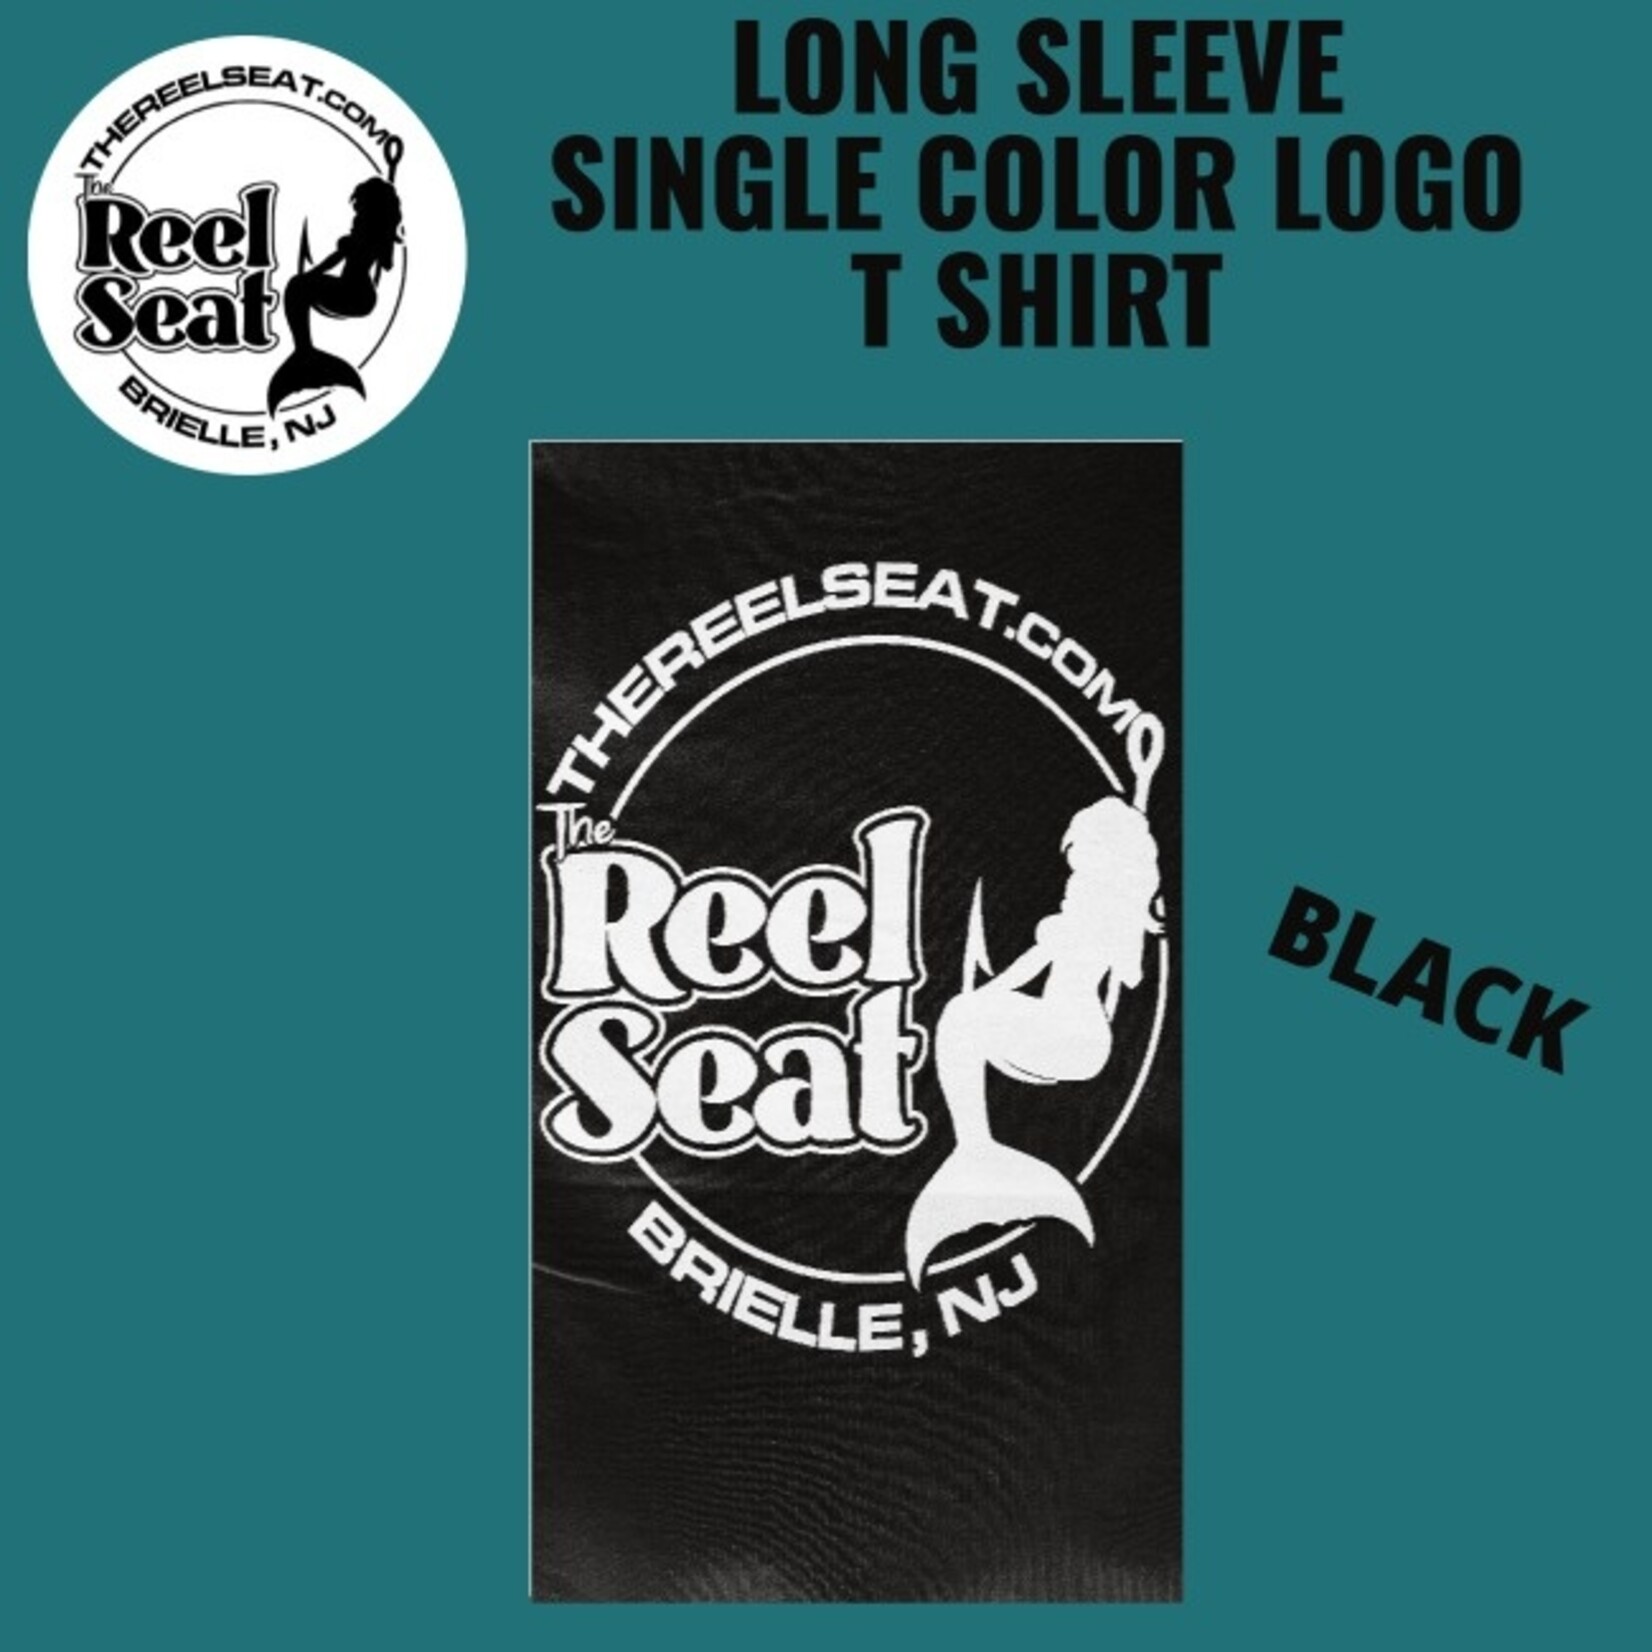 The Reel Seat RS SINGLE COLOR LOGO T SHIRT LONG SLEEVE